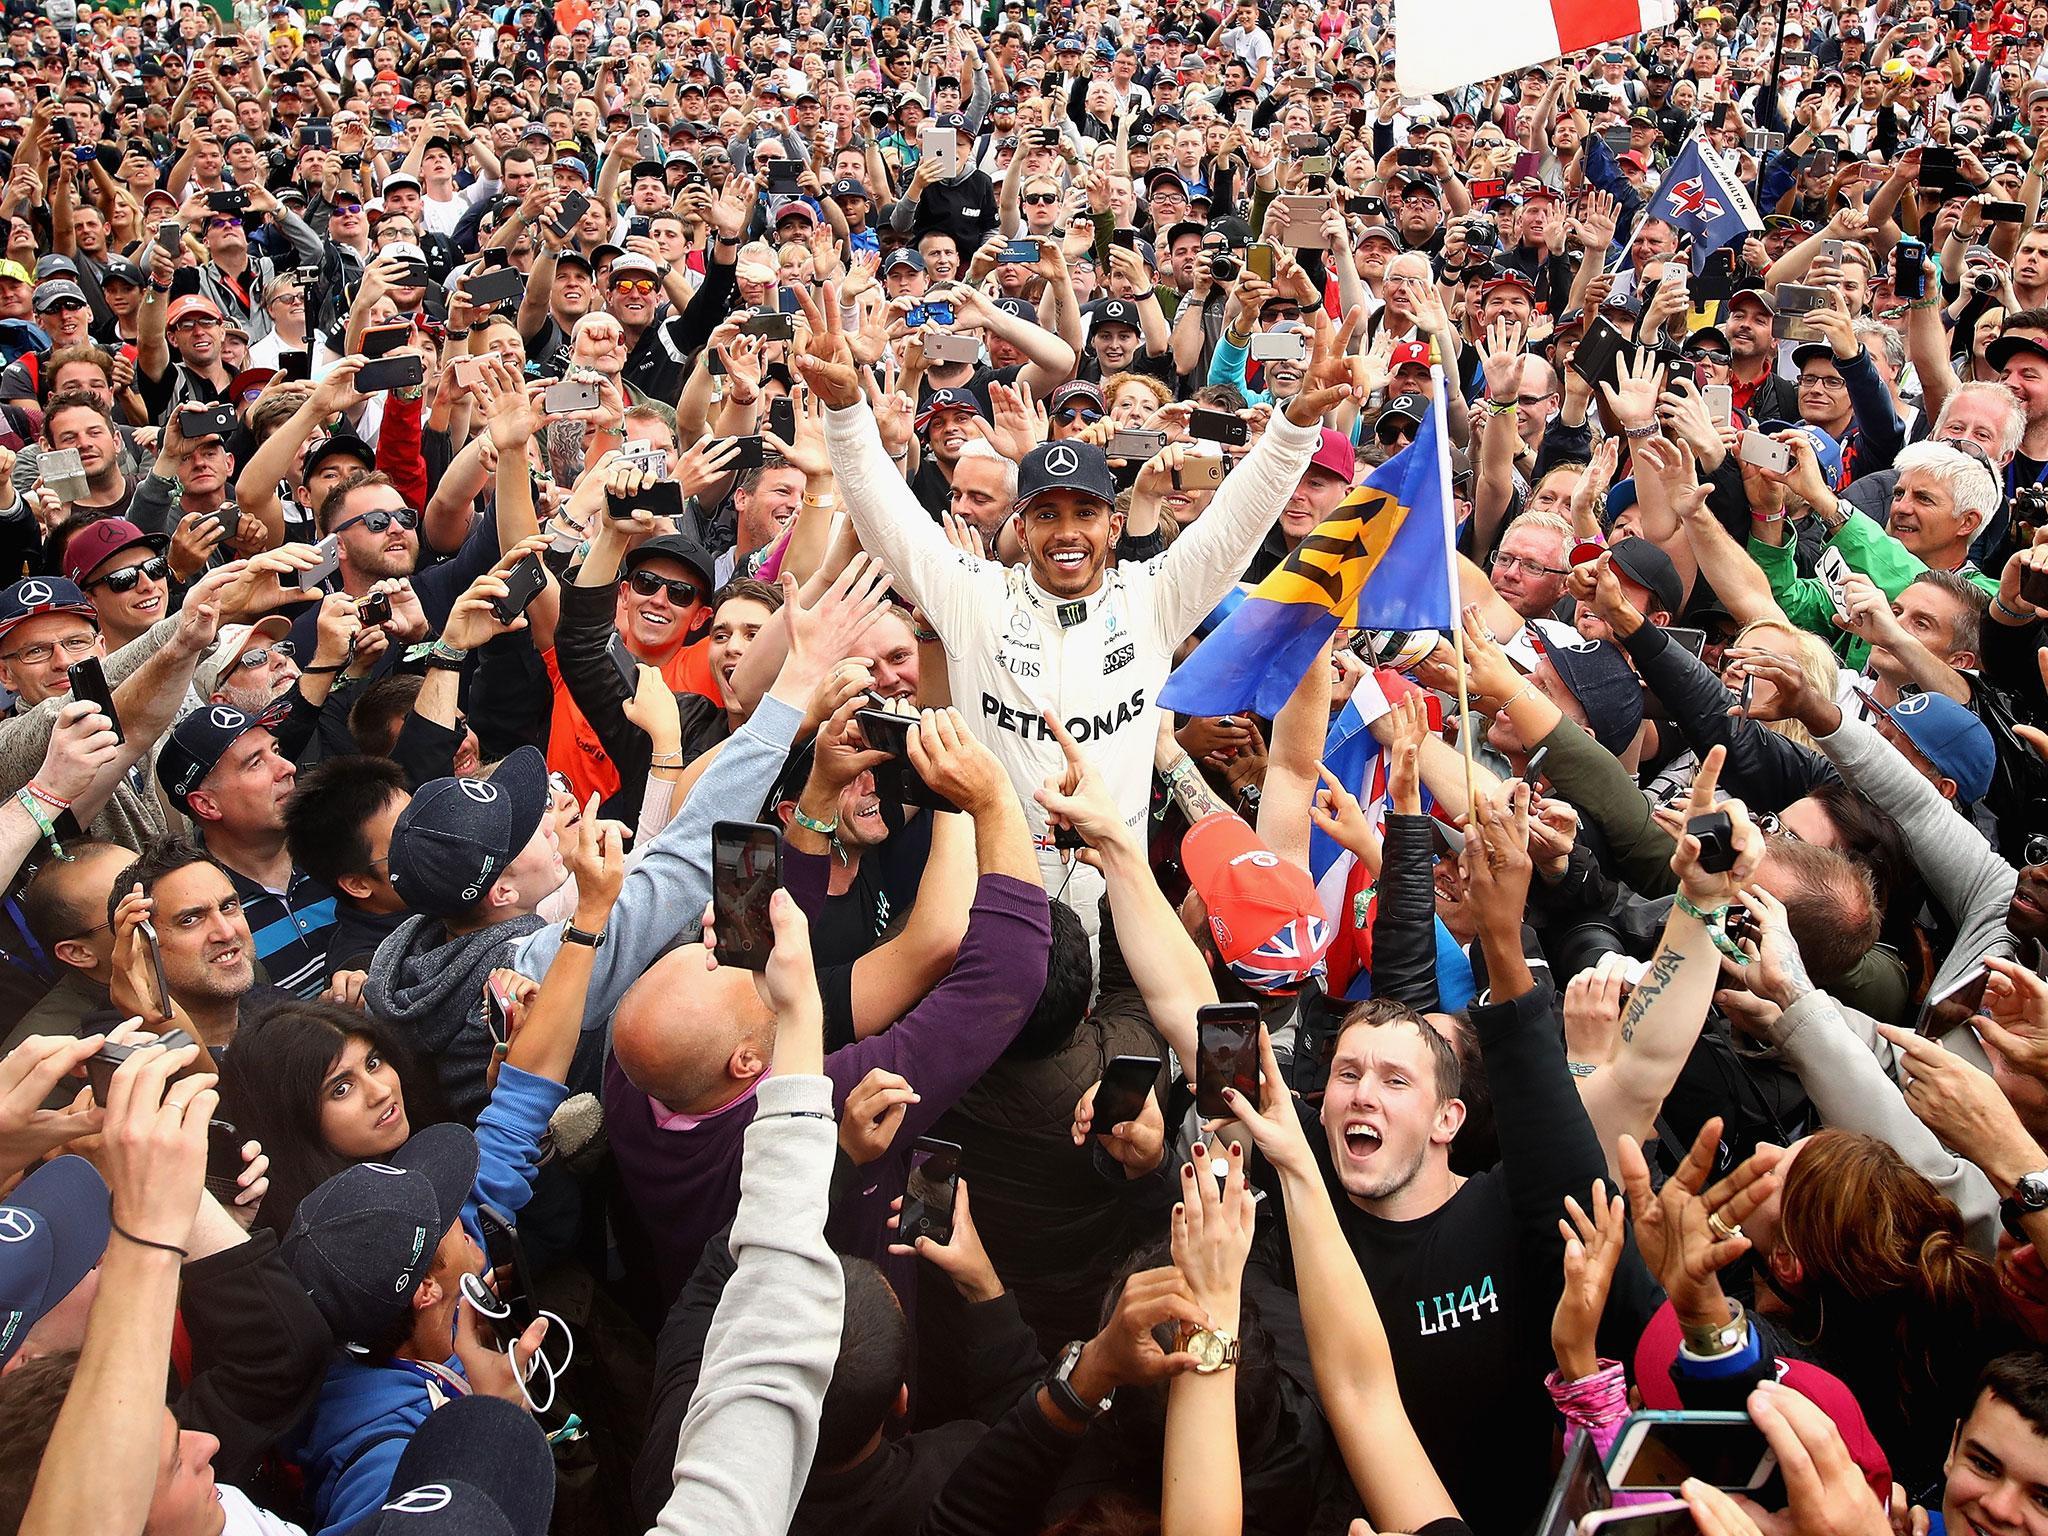 Lewis Hamilton put on a masterclass to win at Silverstone once again